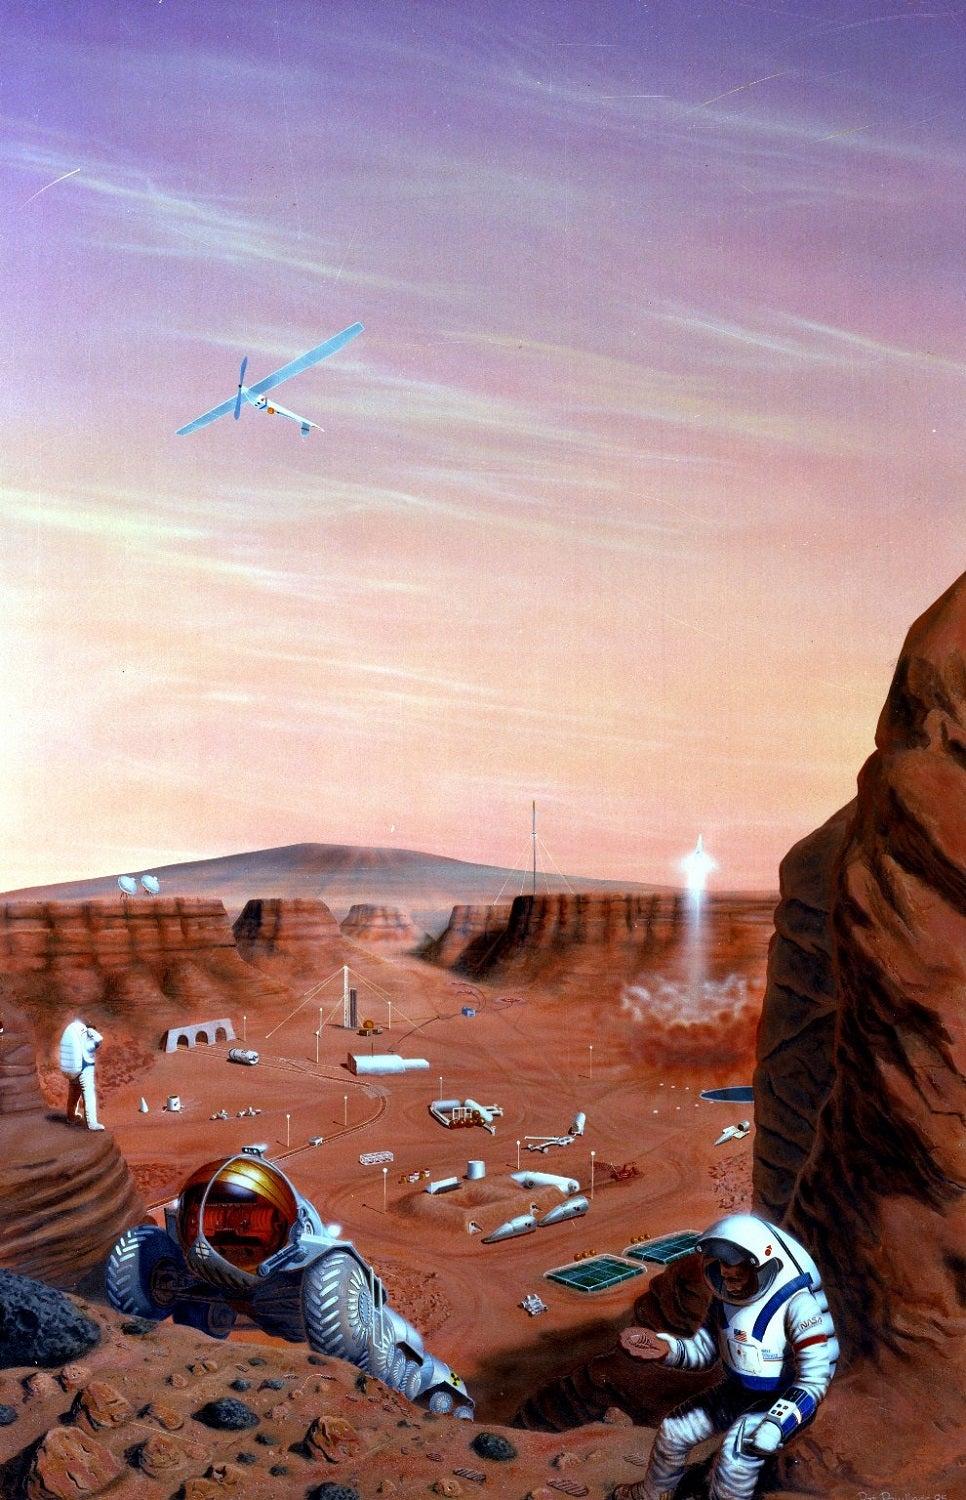 Mars astronauts picking up red rock samples in front of a Martian colony against a purple sky. Illustration.